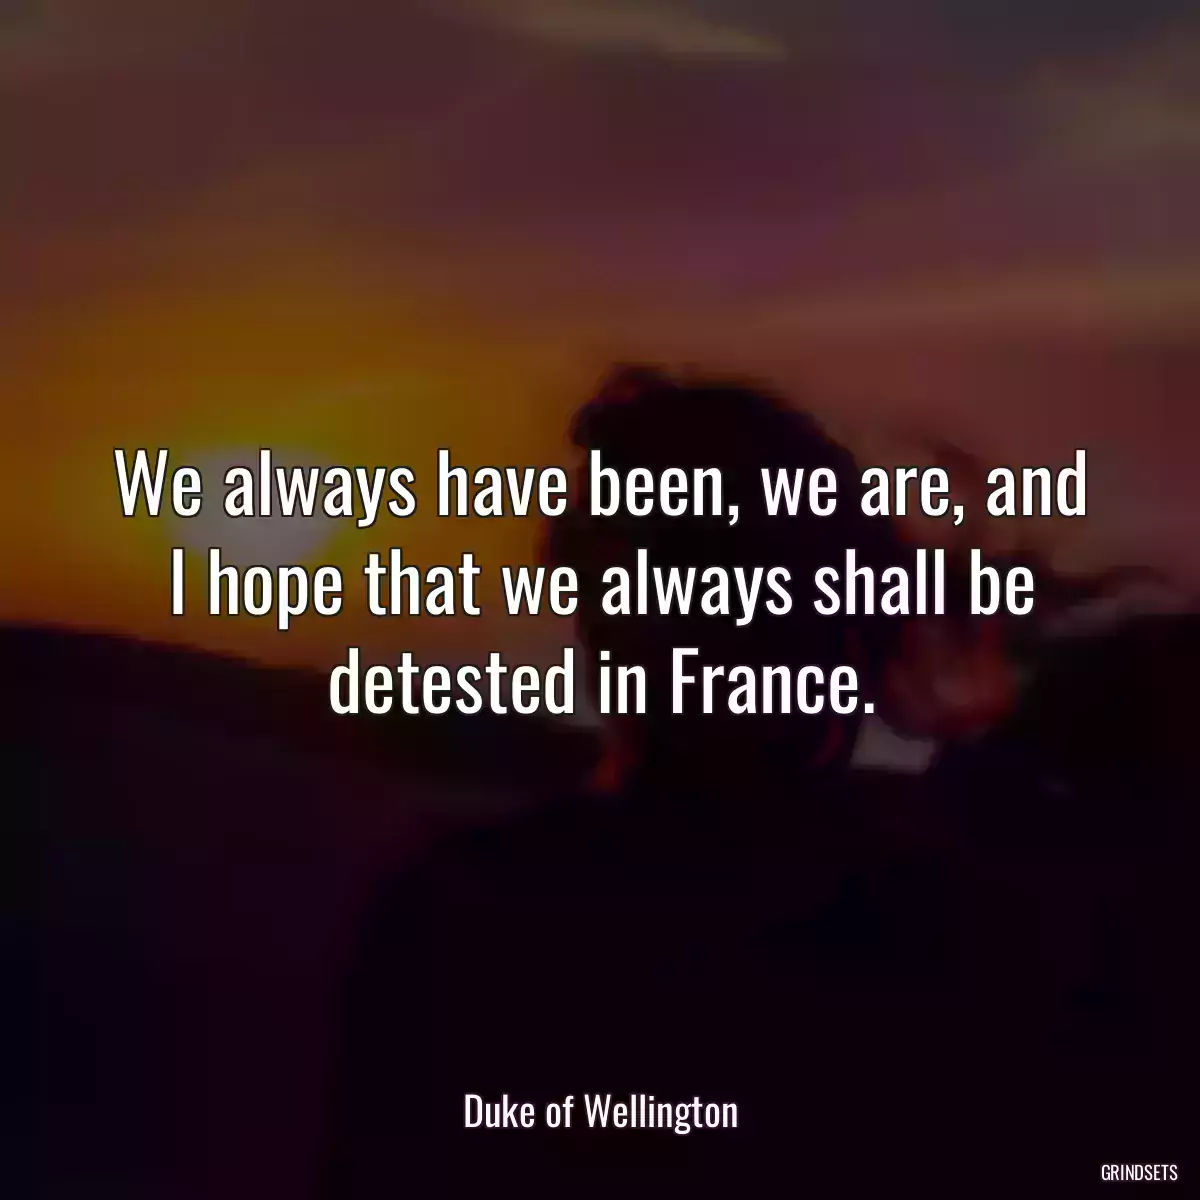 We always have been, we are, and I hope that we always shall be detested in France.